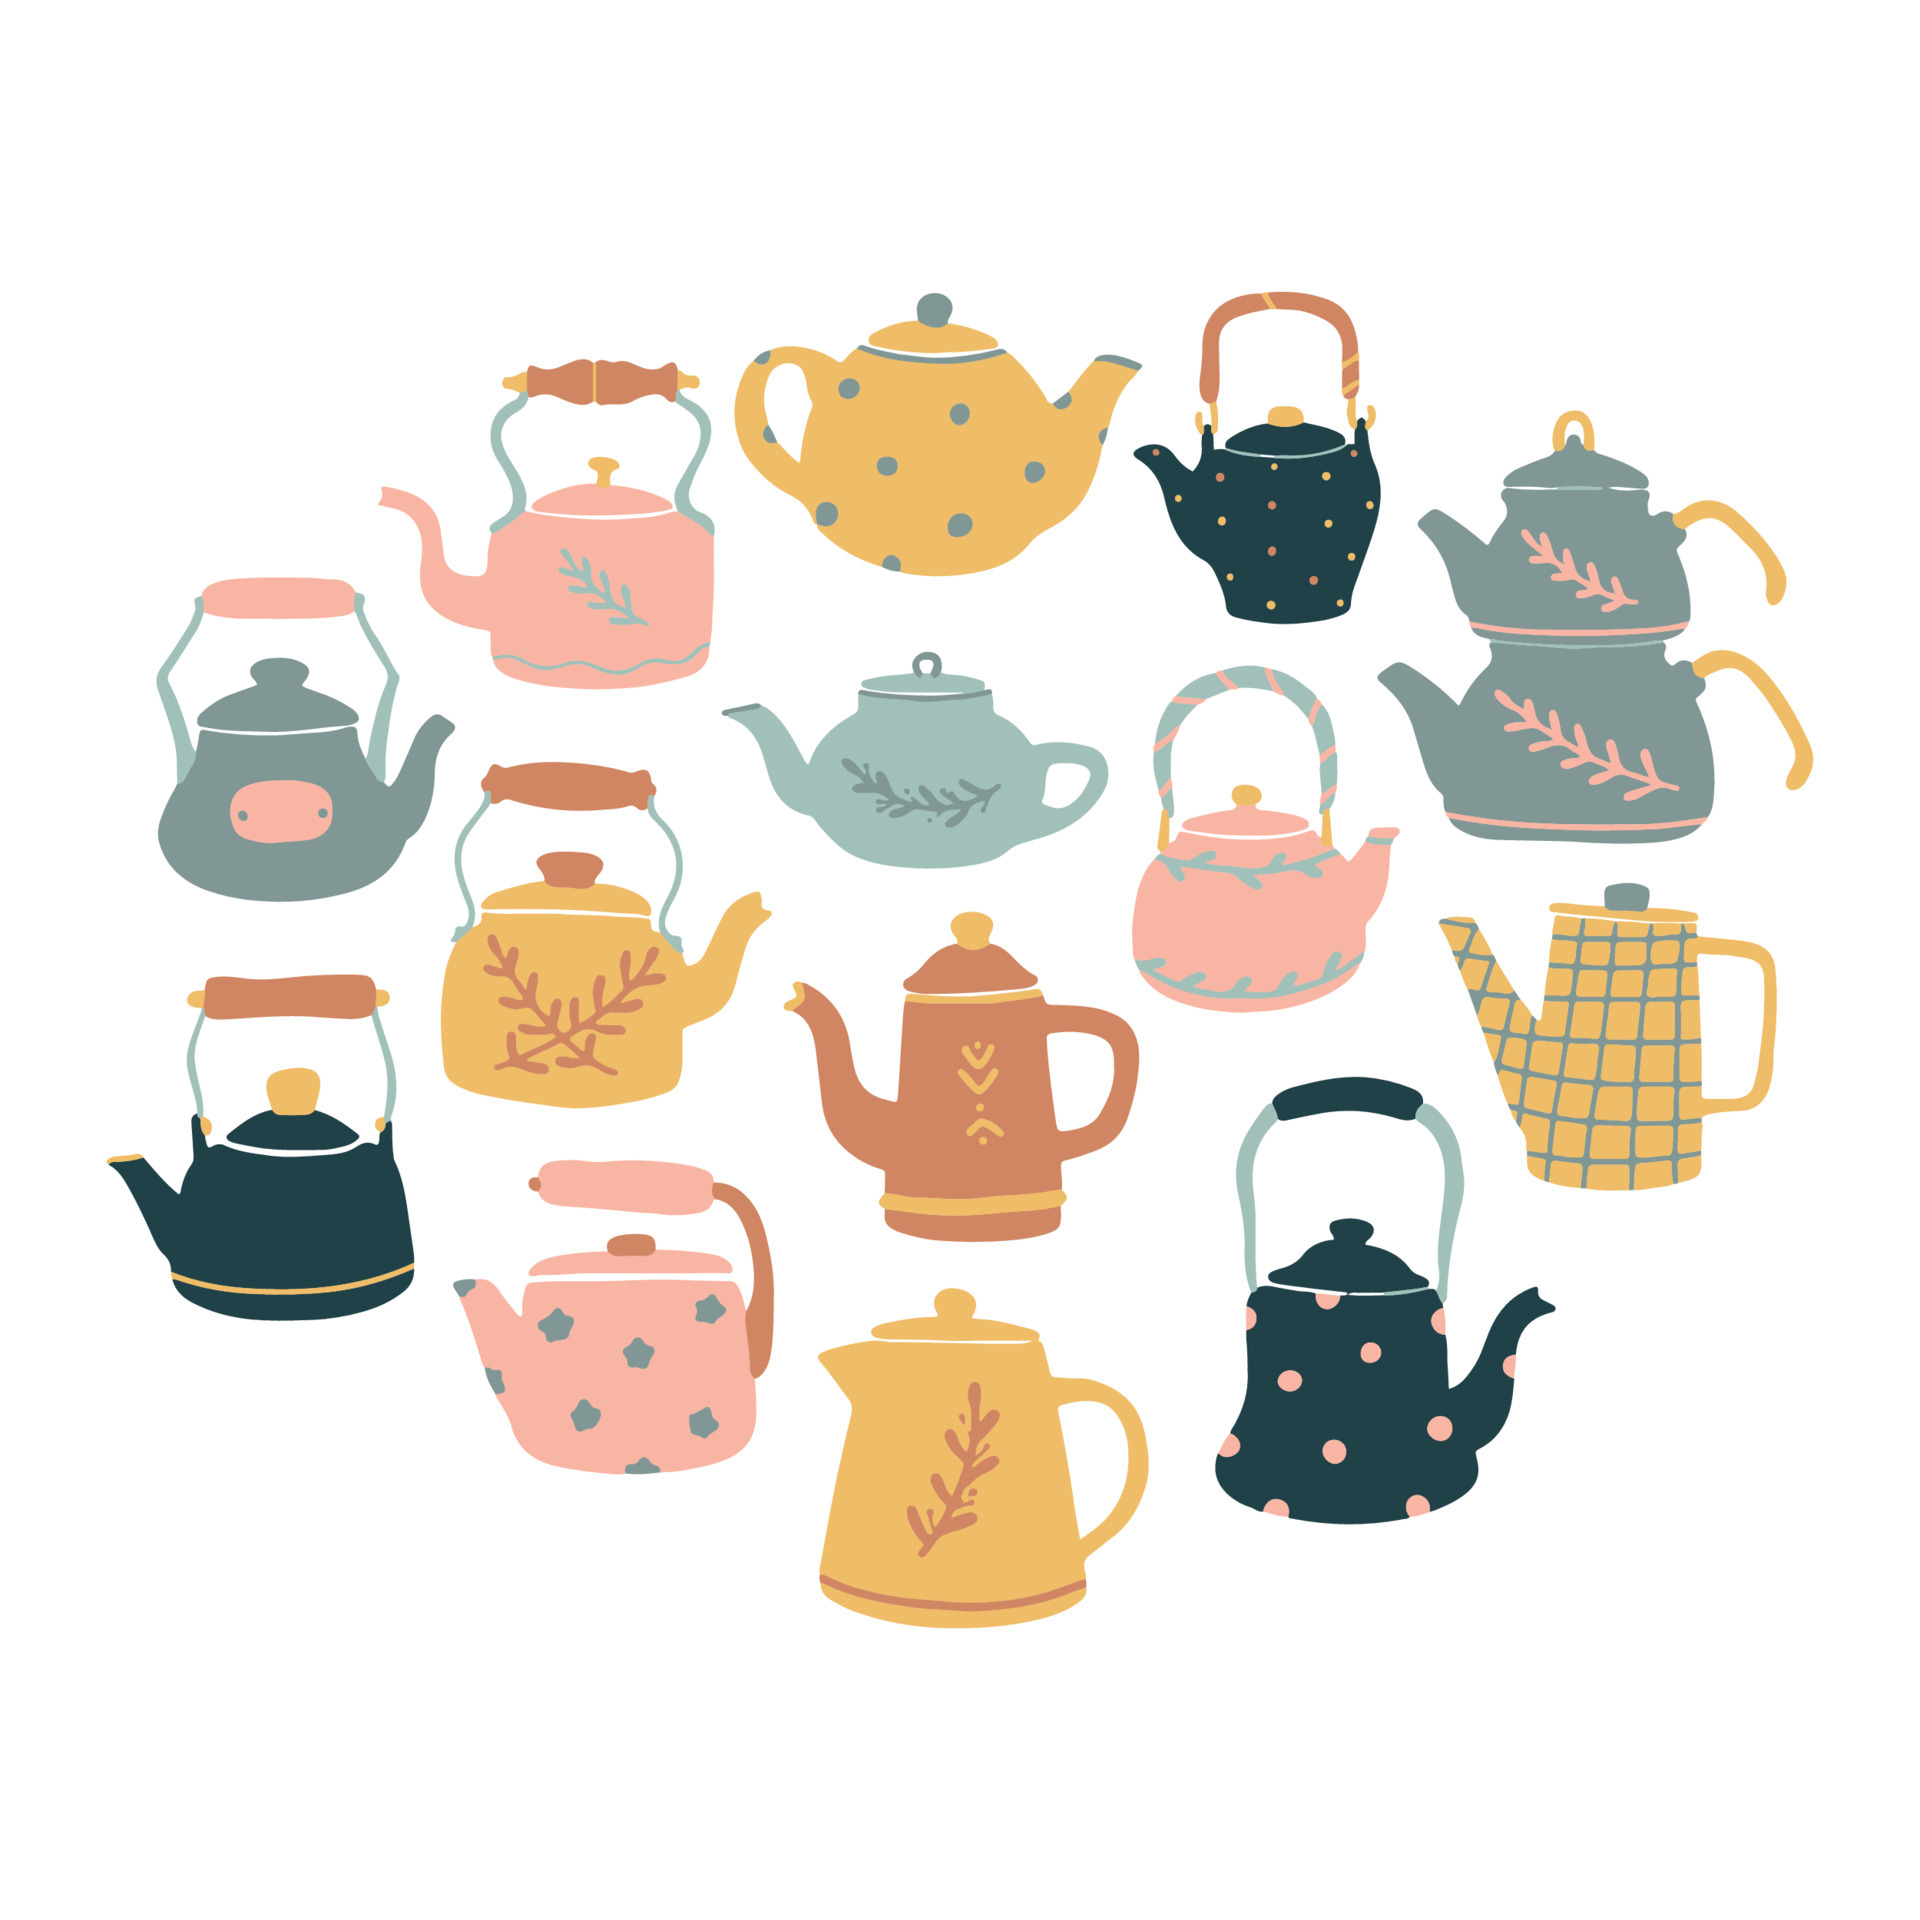 https://static.vecteezy.com/system/resources/previews/005/741/870/original/set-of-hand-drawn-kettles-and-tea-pots-isolated-on-white-background-for-stickers-prints-clip-art-logos-signs-cards-etc-eps-10-vector.jpg